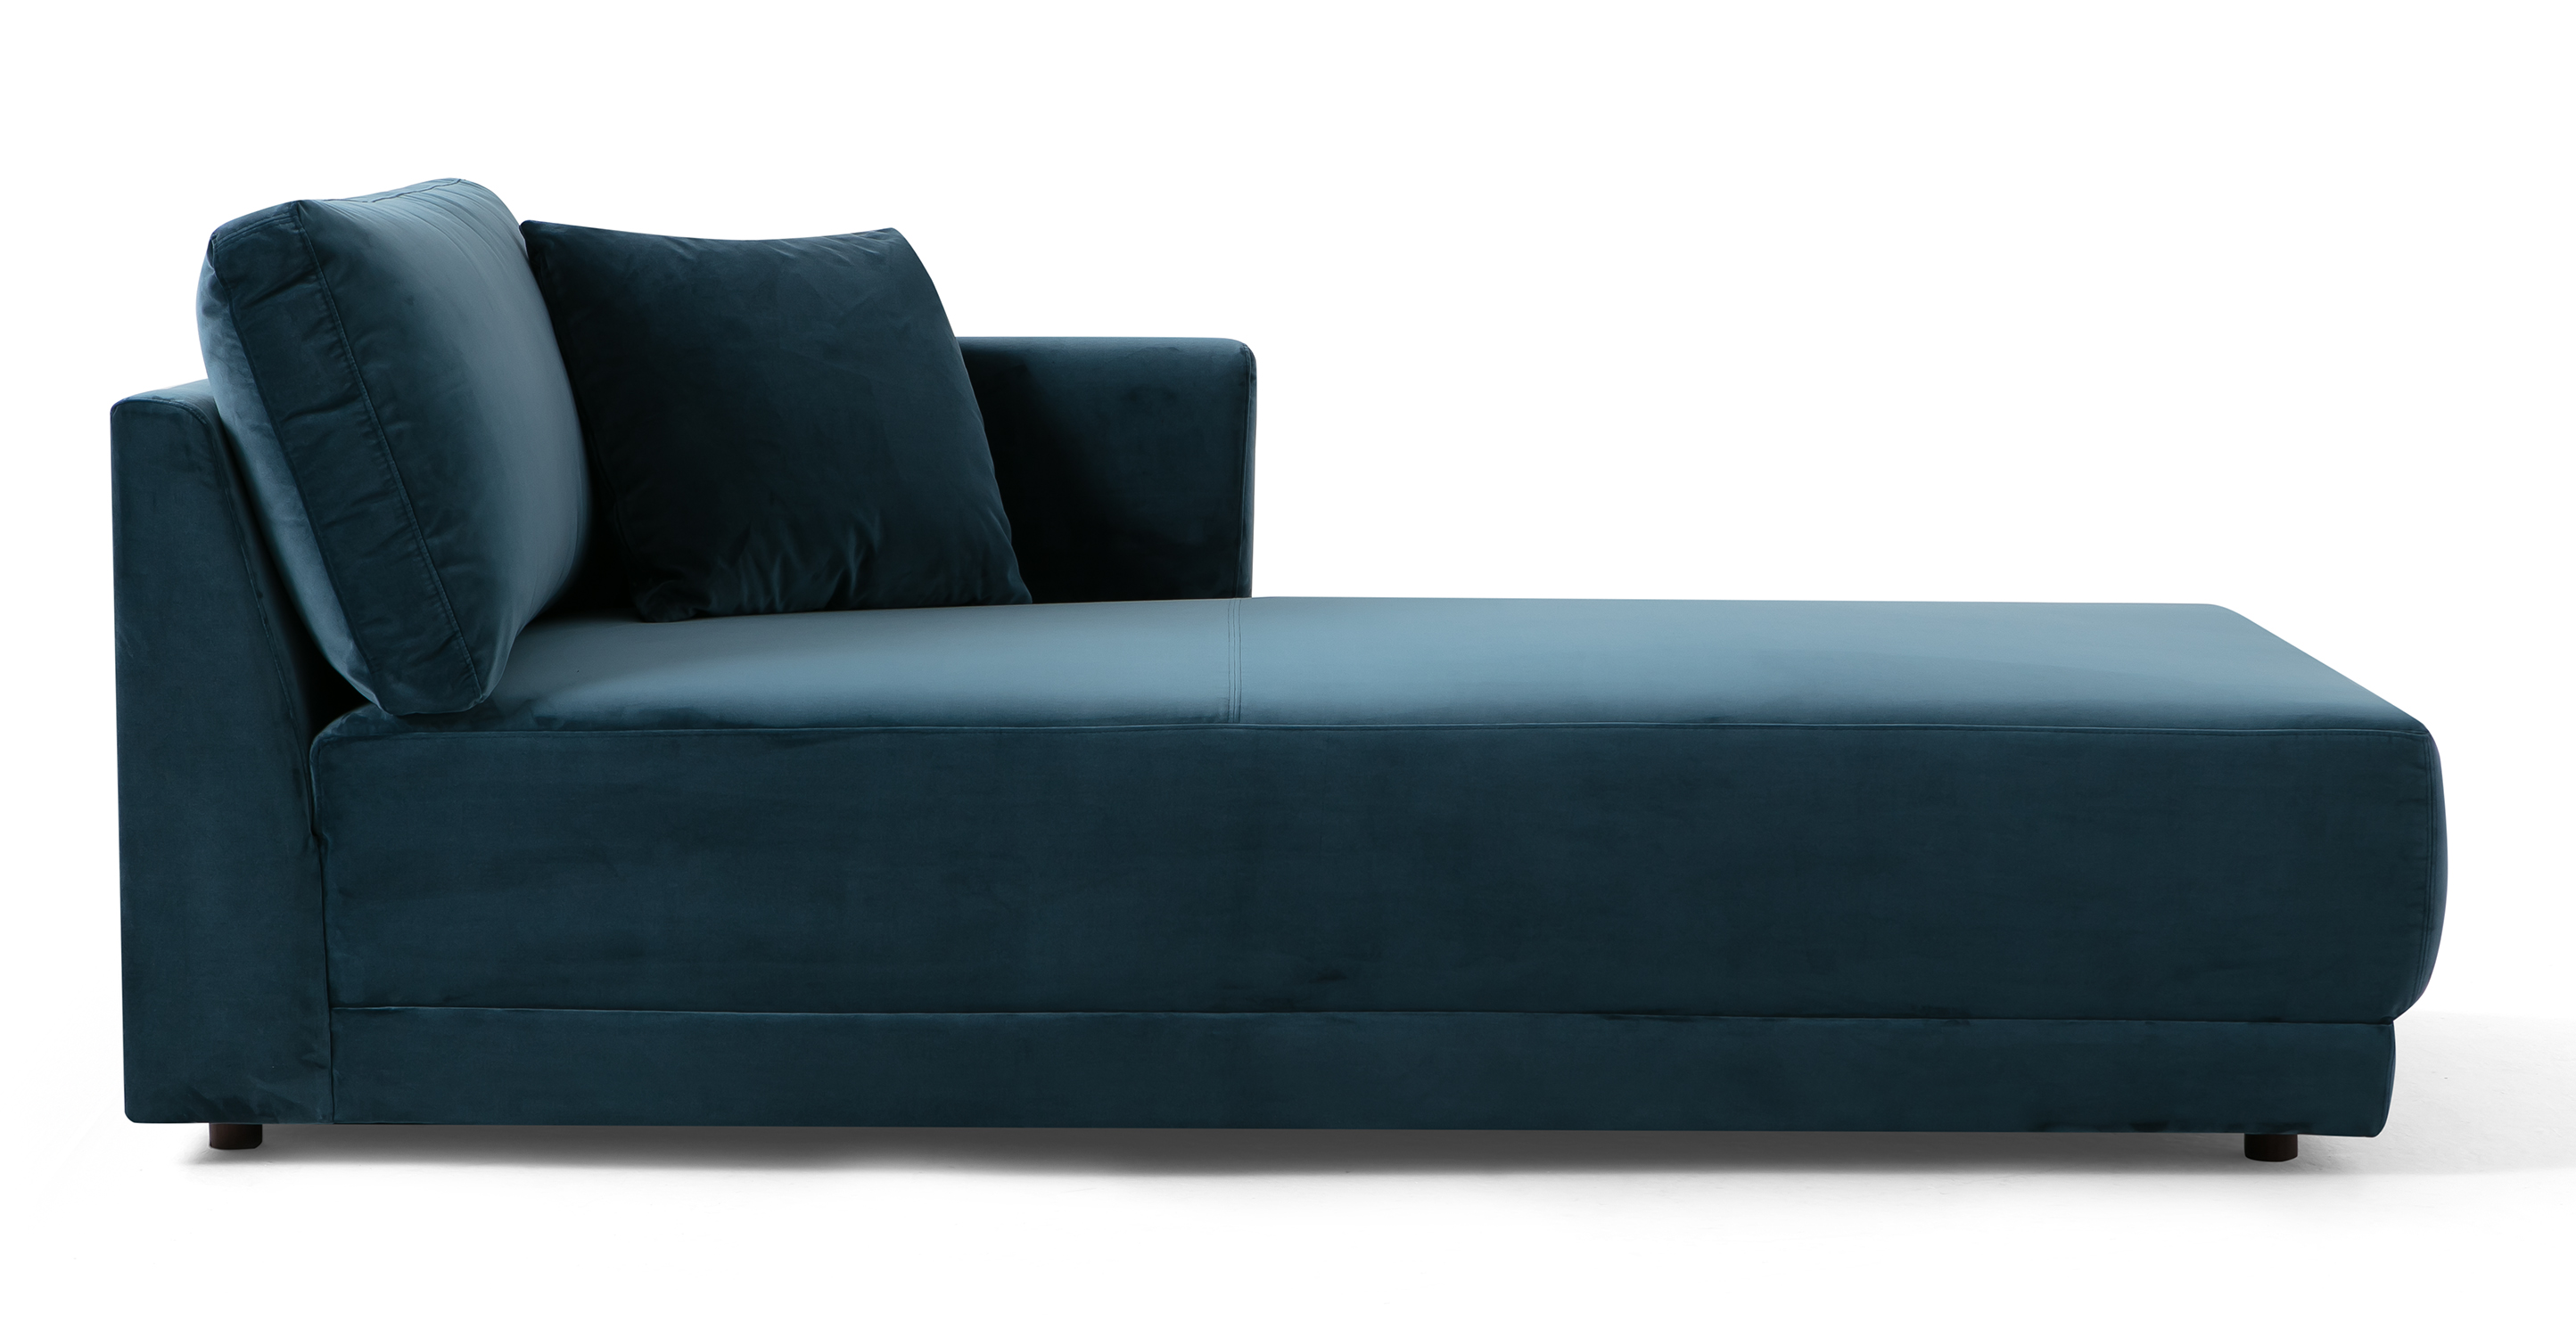 Petrol Domus Right Chaise has one straight arm on the right when facing, one back cushion, and one throw. This item can be used alone or added as part of the Domus series. The Domus is a floor based series, fully upholstered with a large attached seat cushion. The style is modern and minimalist.